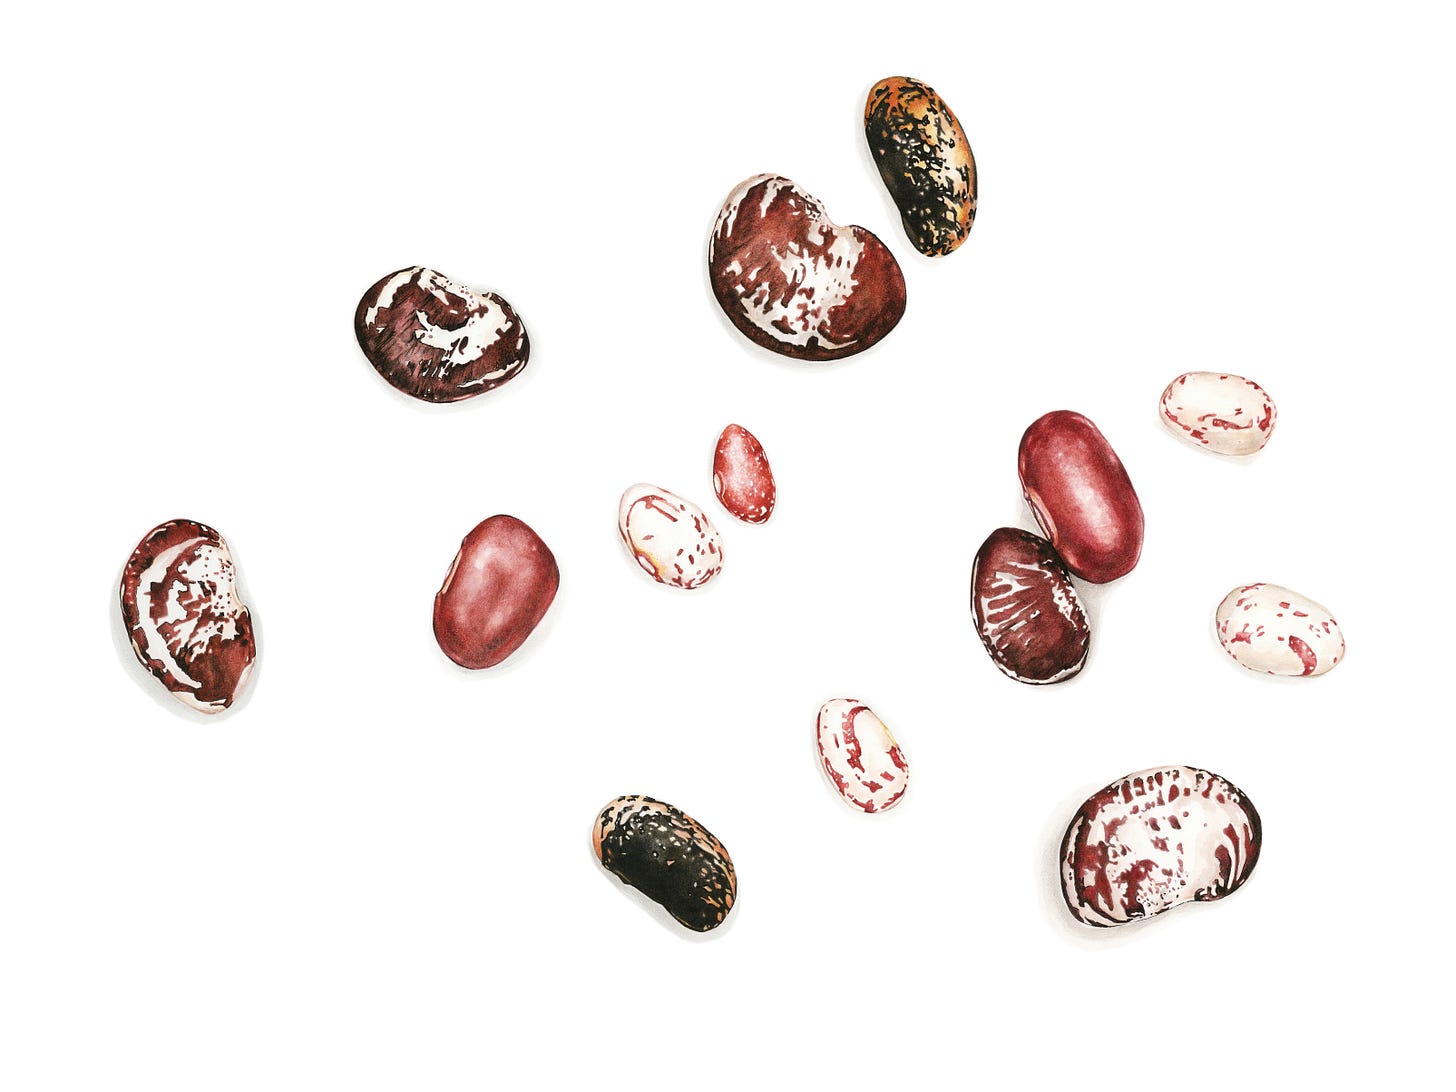 watercolor painting of different colored heirloom beans against a white background